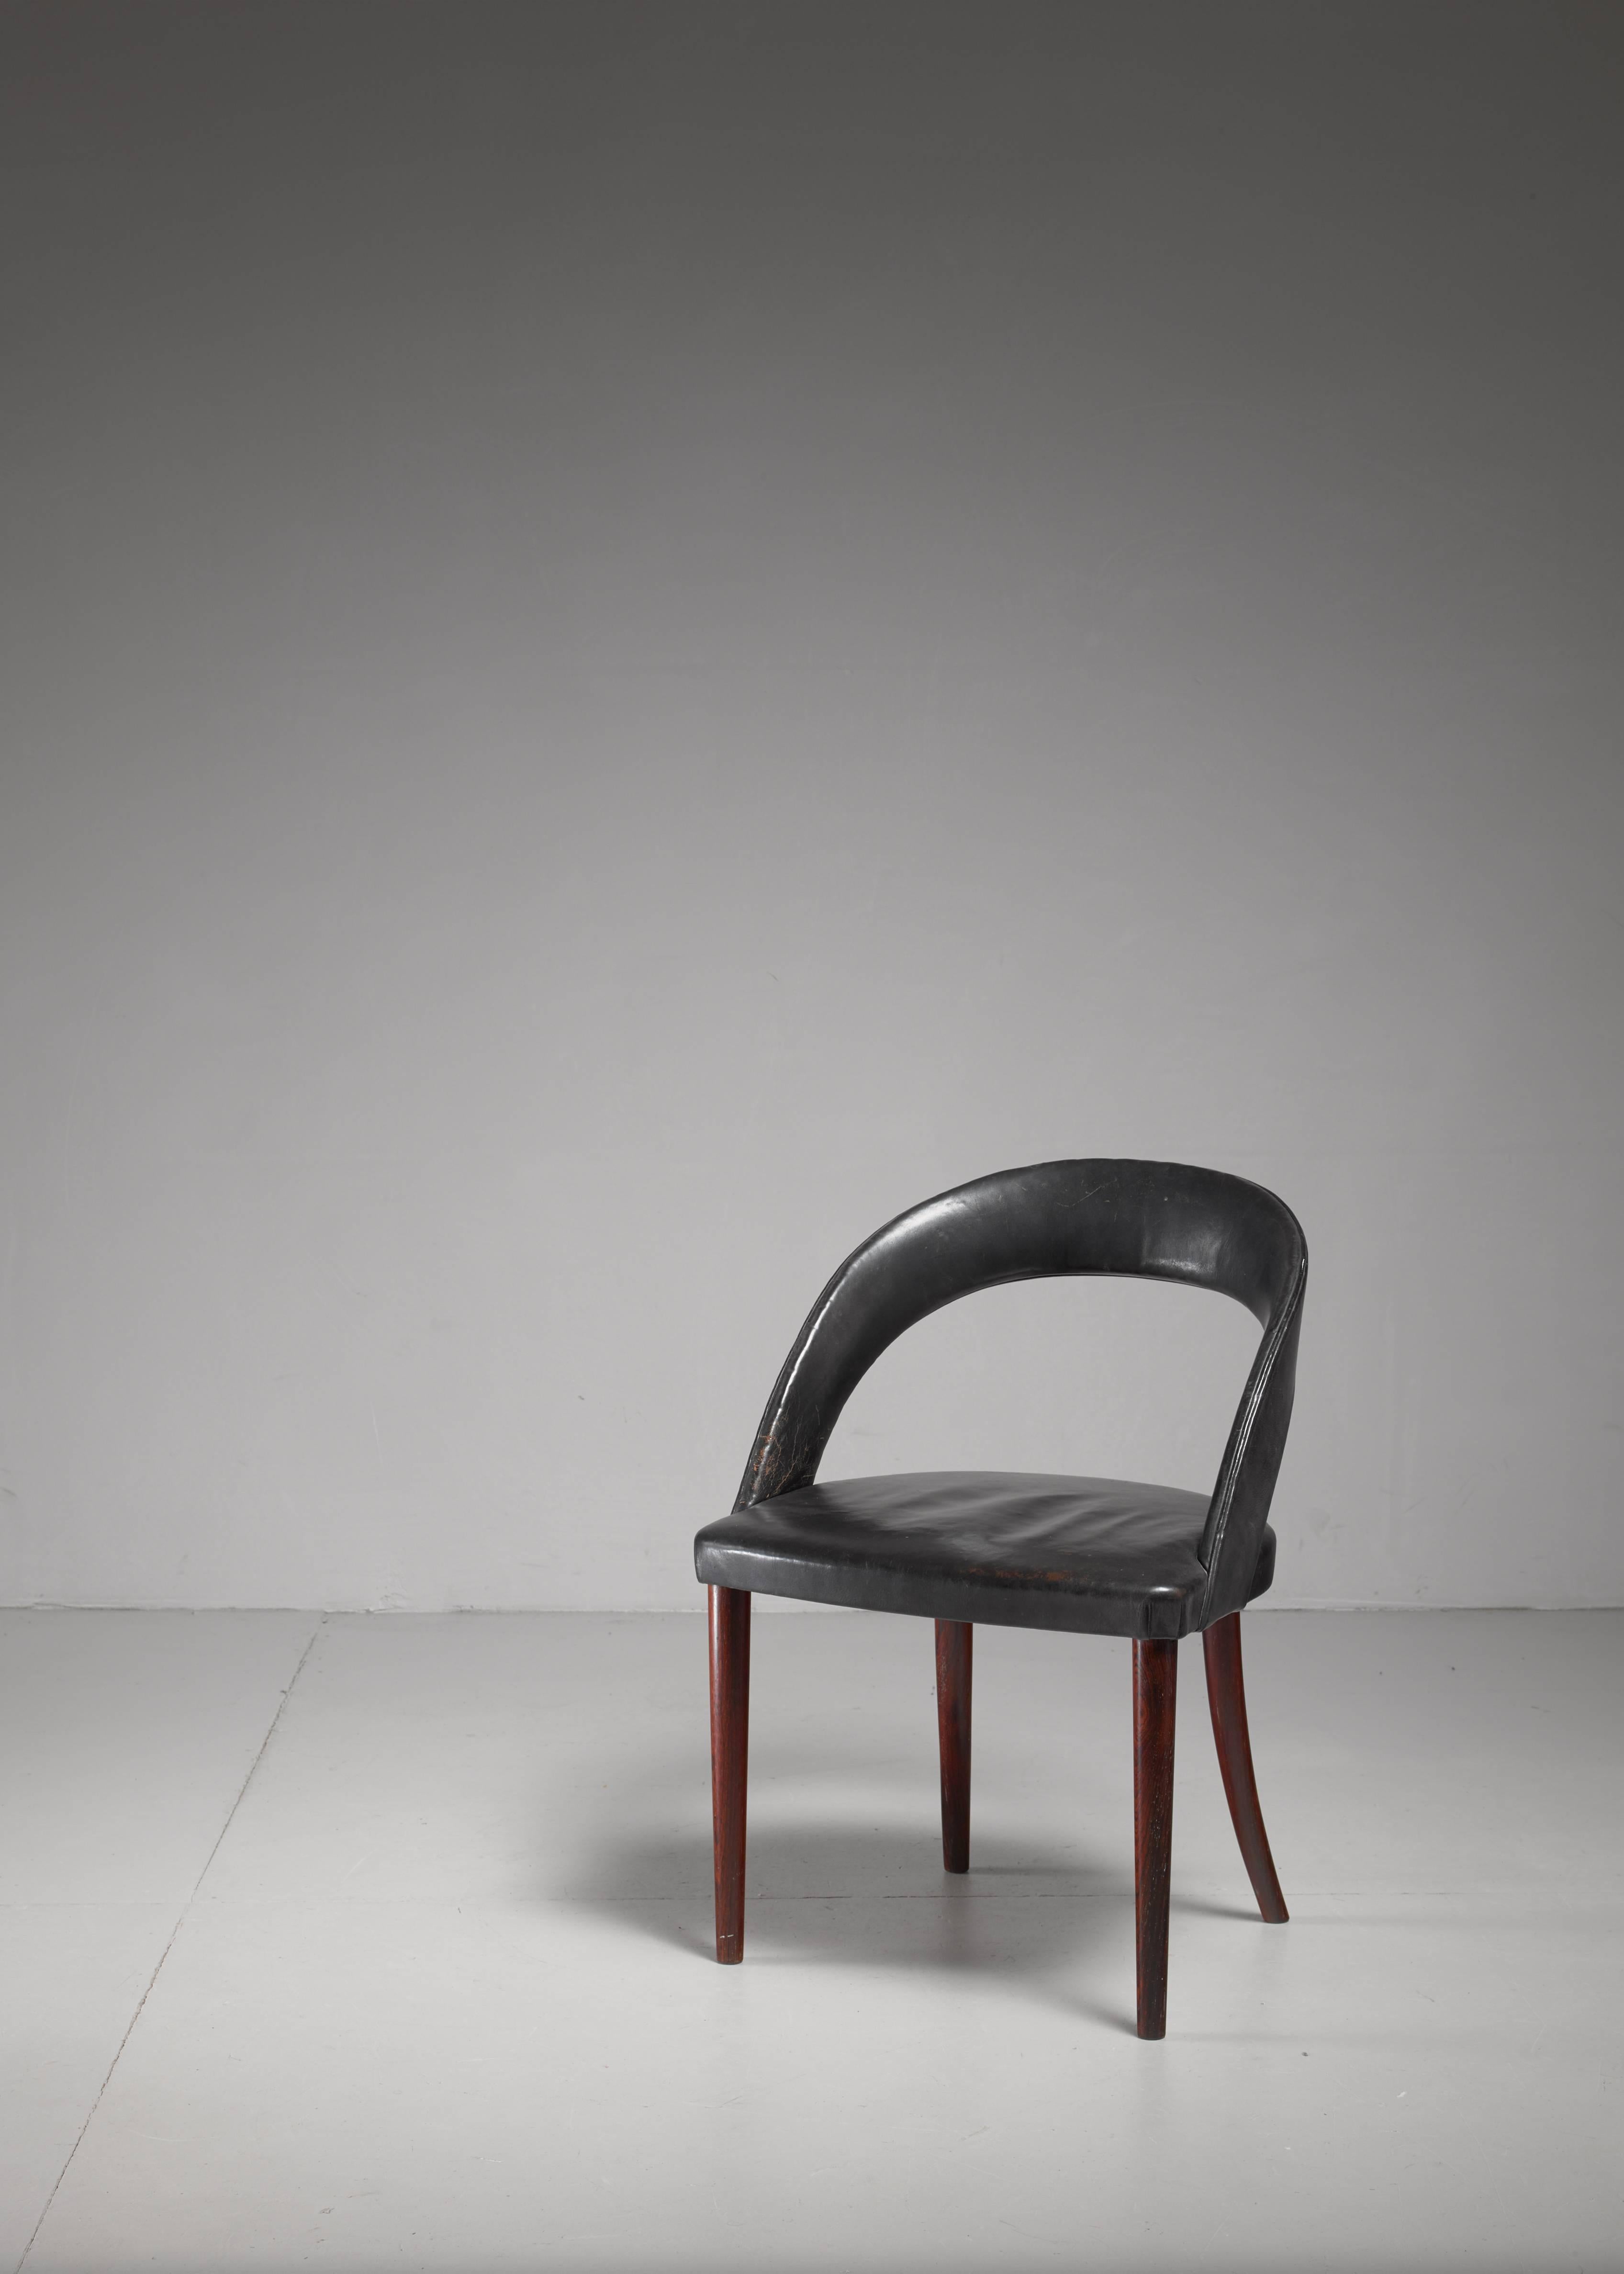 An elegant vanity chair by Danish designer Frode Holm for Illums Bolighus. The chair stands on round, tapering rosewood legs and has a thin and curved backrest. The seat and back are upholstered with black leather. The leather has a mild wear, which